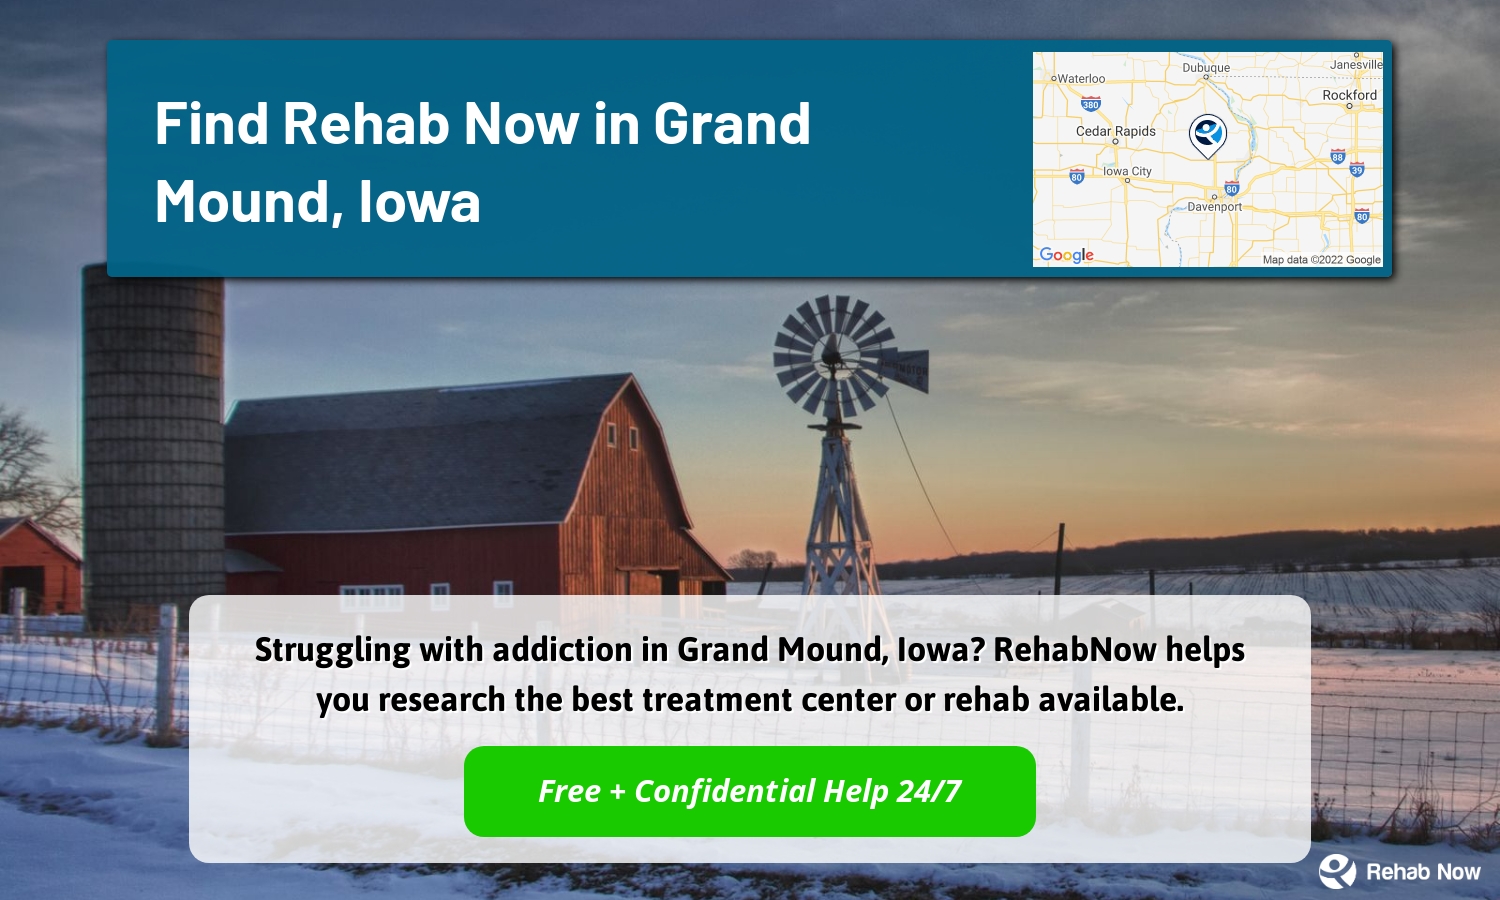 Struggling with addiction in Grand Mound, Iowa? RehabNow helps you research the best treatment center or rehab available.